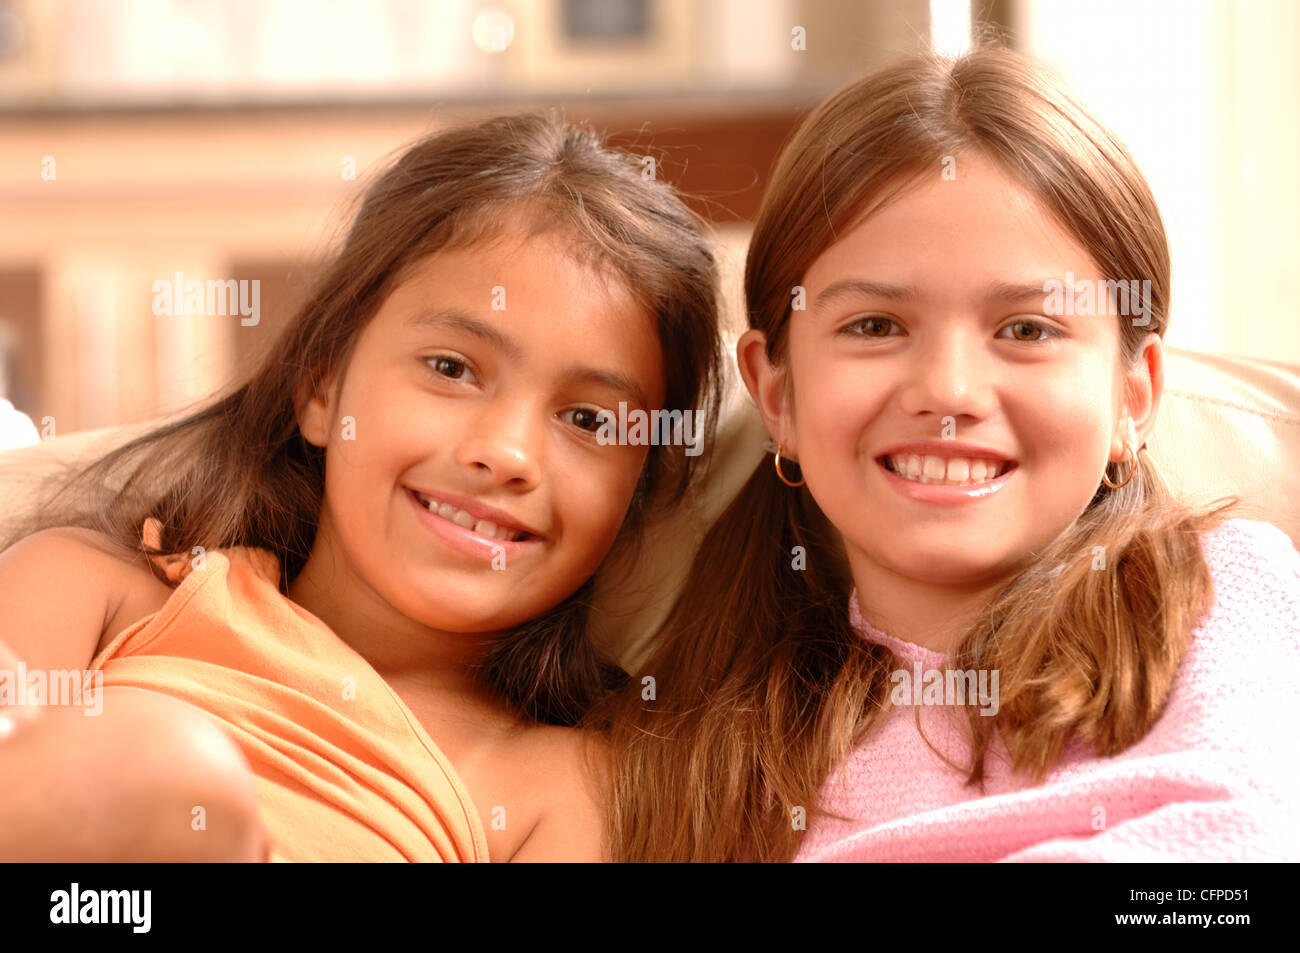 Close-up of Girls on Couch Stock Photo